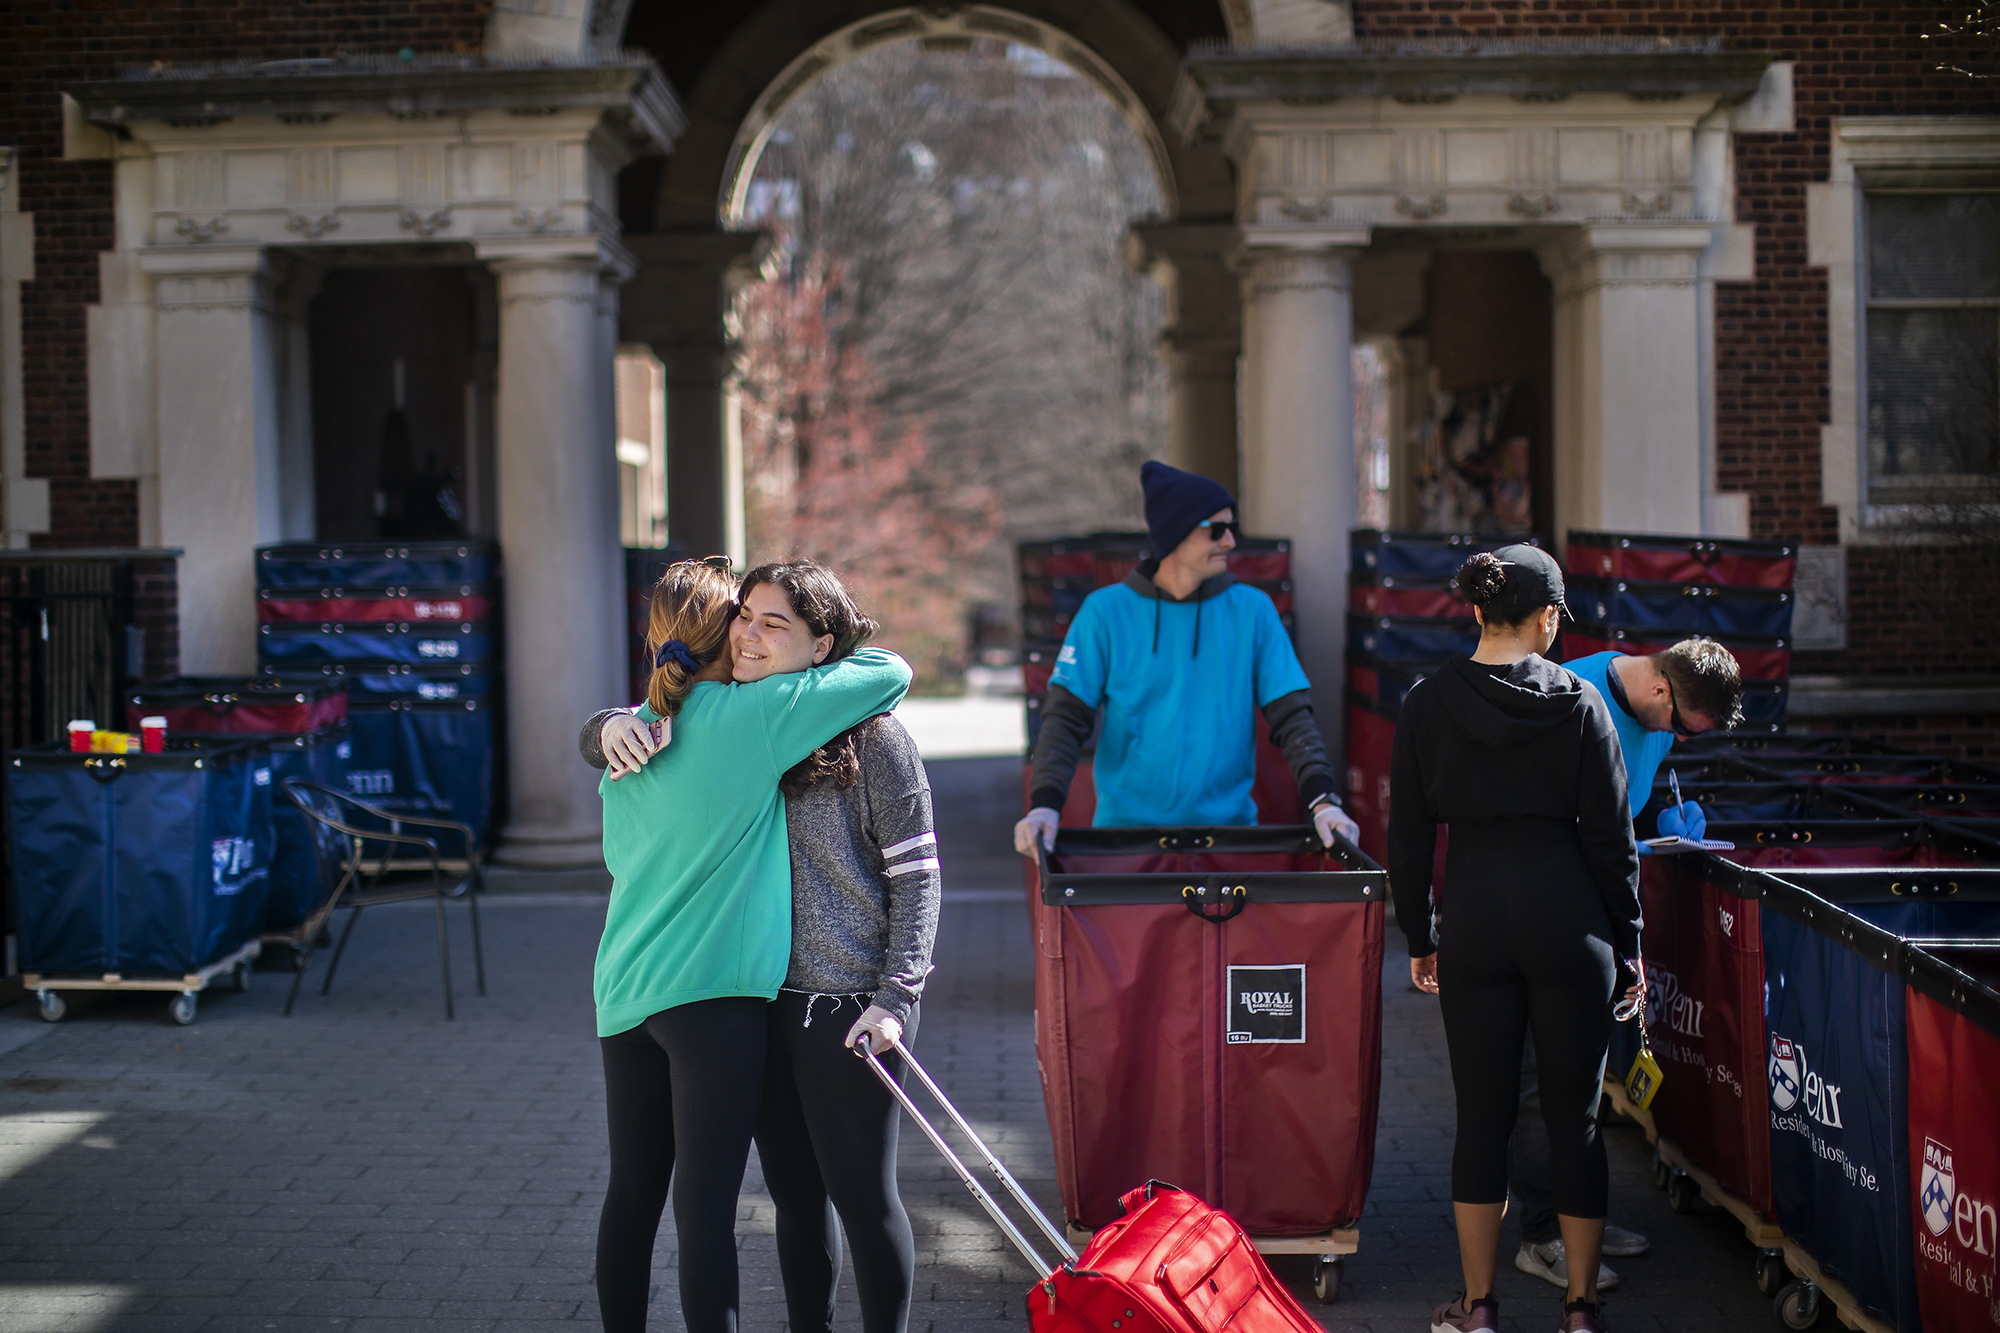 Two students embrace on the Quad amidst move-out carts